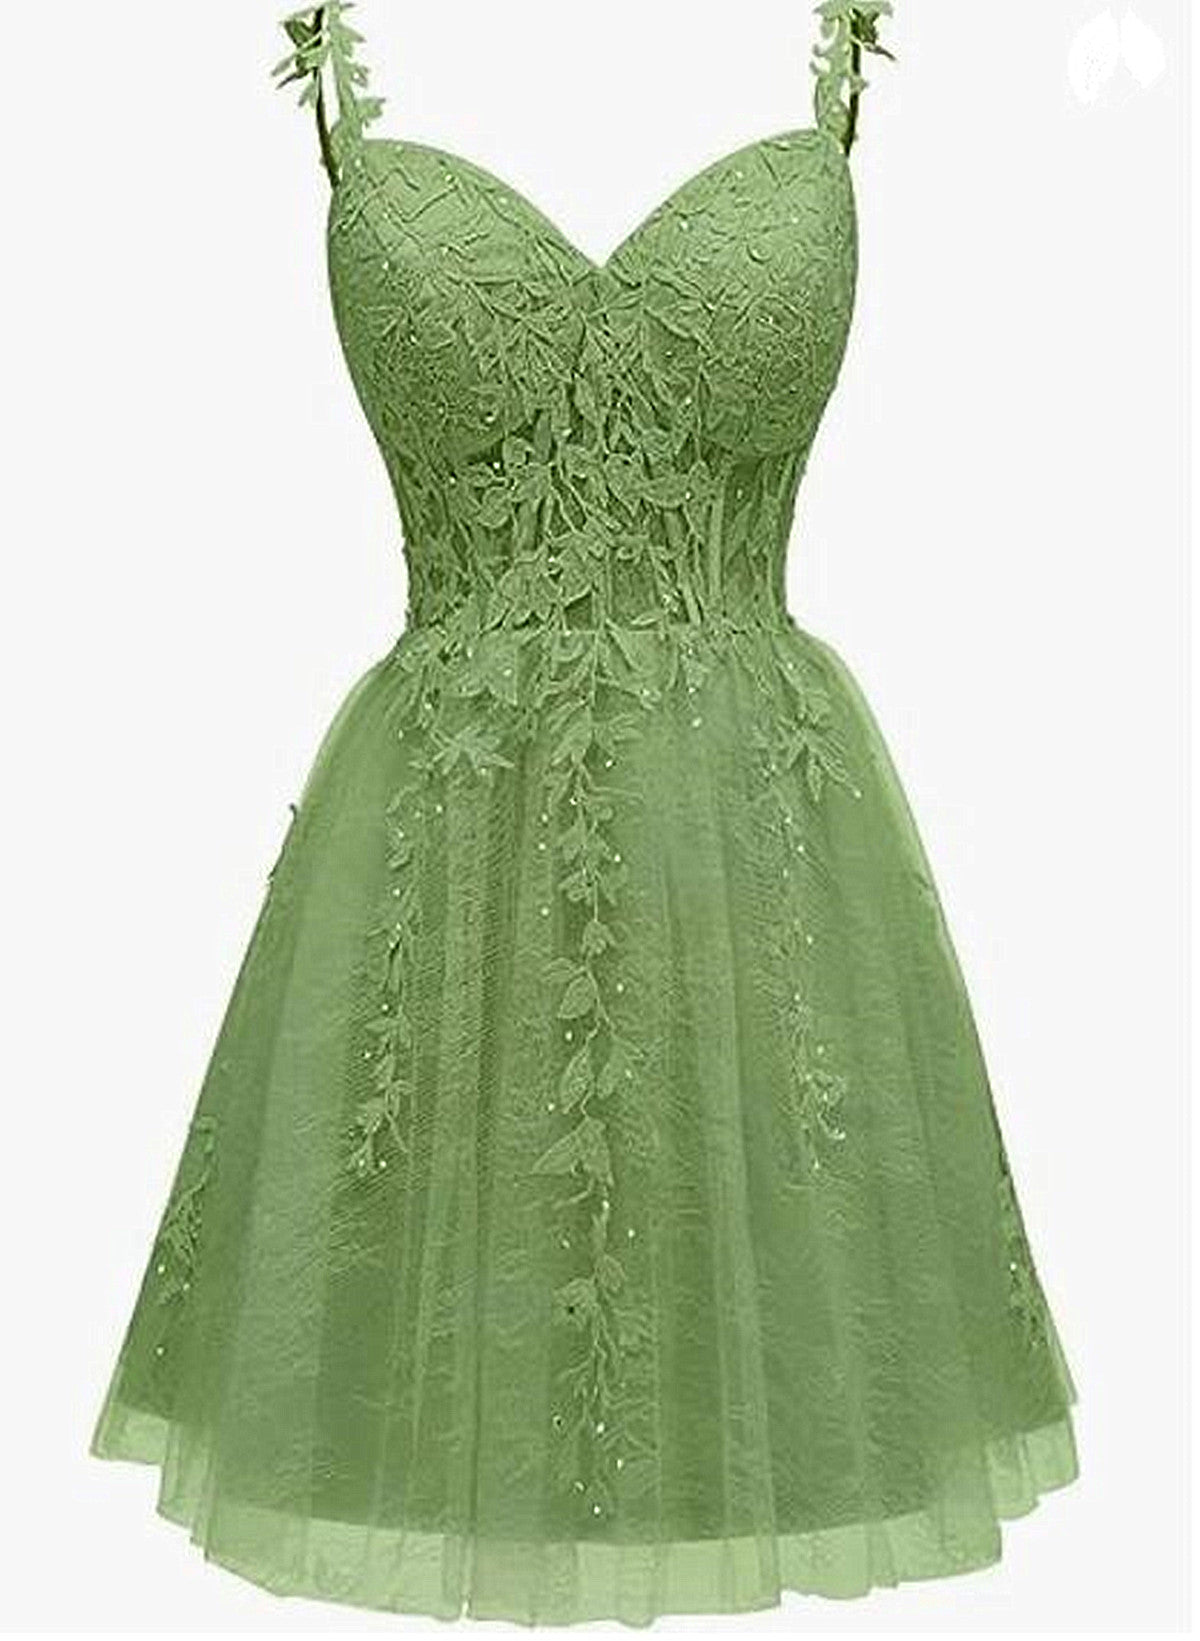 Lovely Green Sweetheart Beaded Straps Party Dress, Green Tulle Corset Homecoming Dress outfit, Bridesmaids Dresses Satin